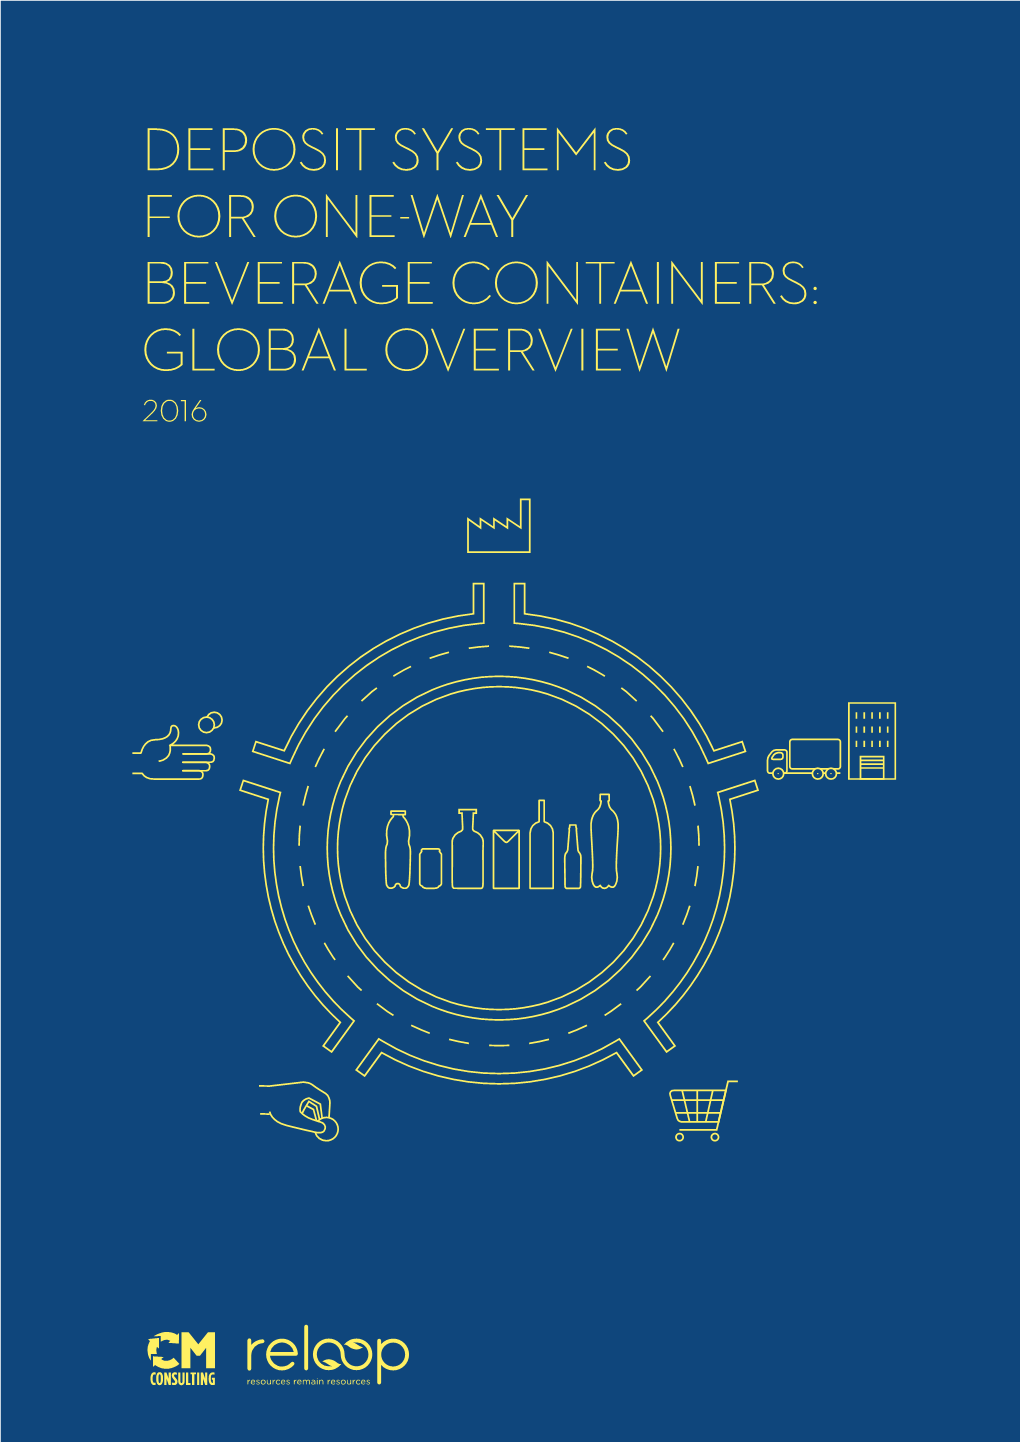 Deposit Systems for One-Way Beverage Containers: Global Overview (2016)